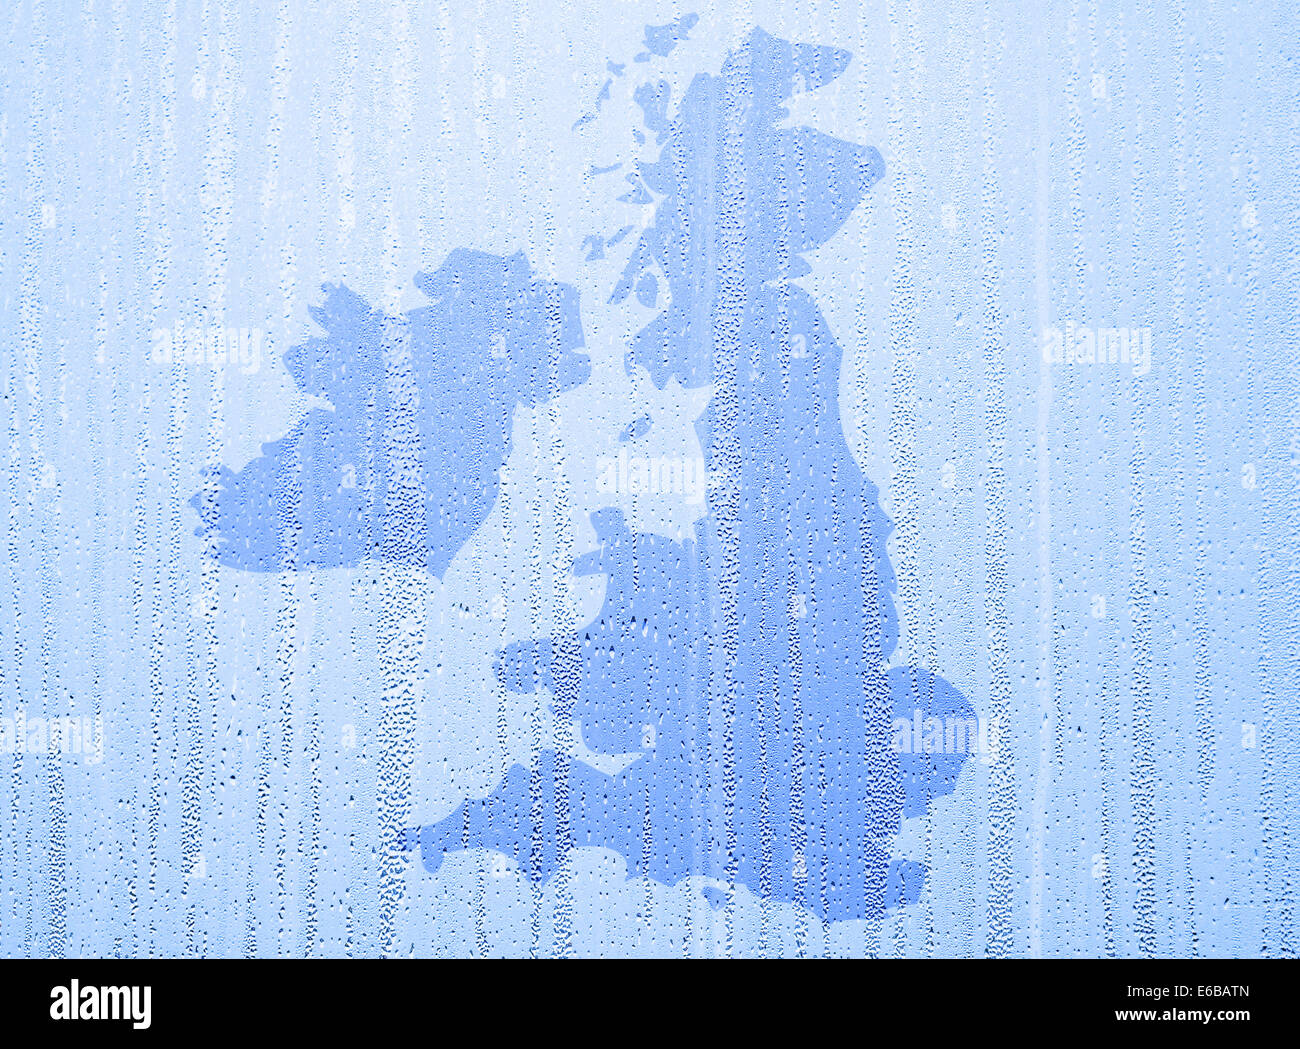 Water pattern overlaid over UK outline map. Stock Photo